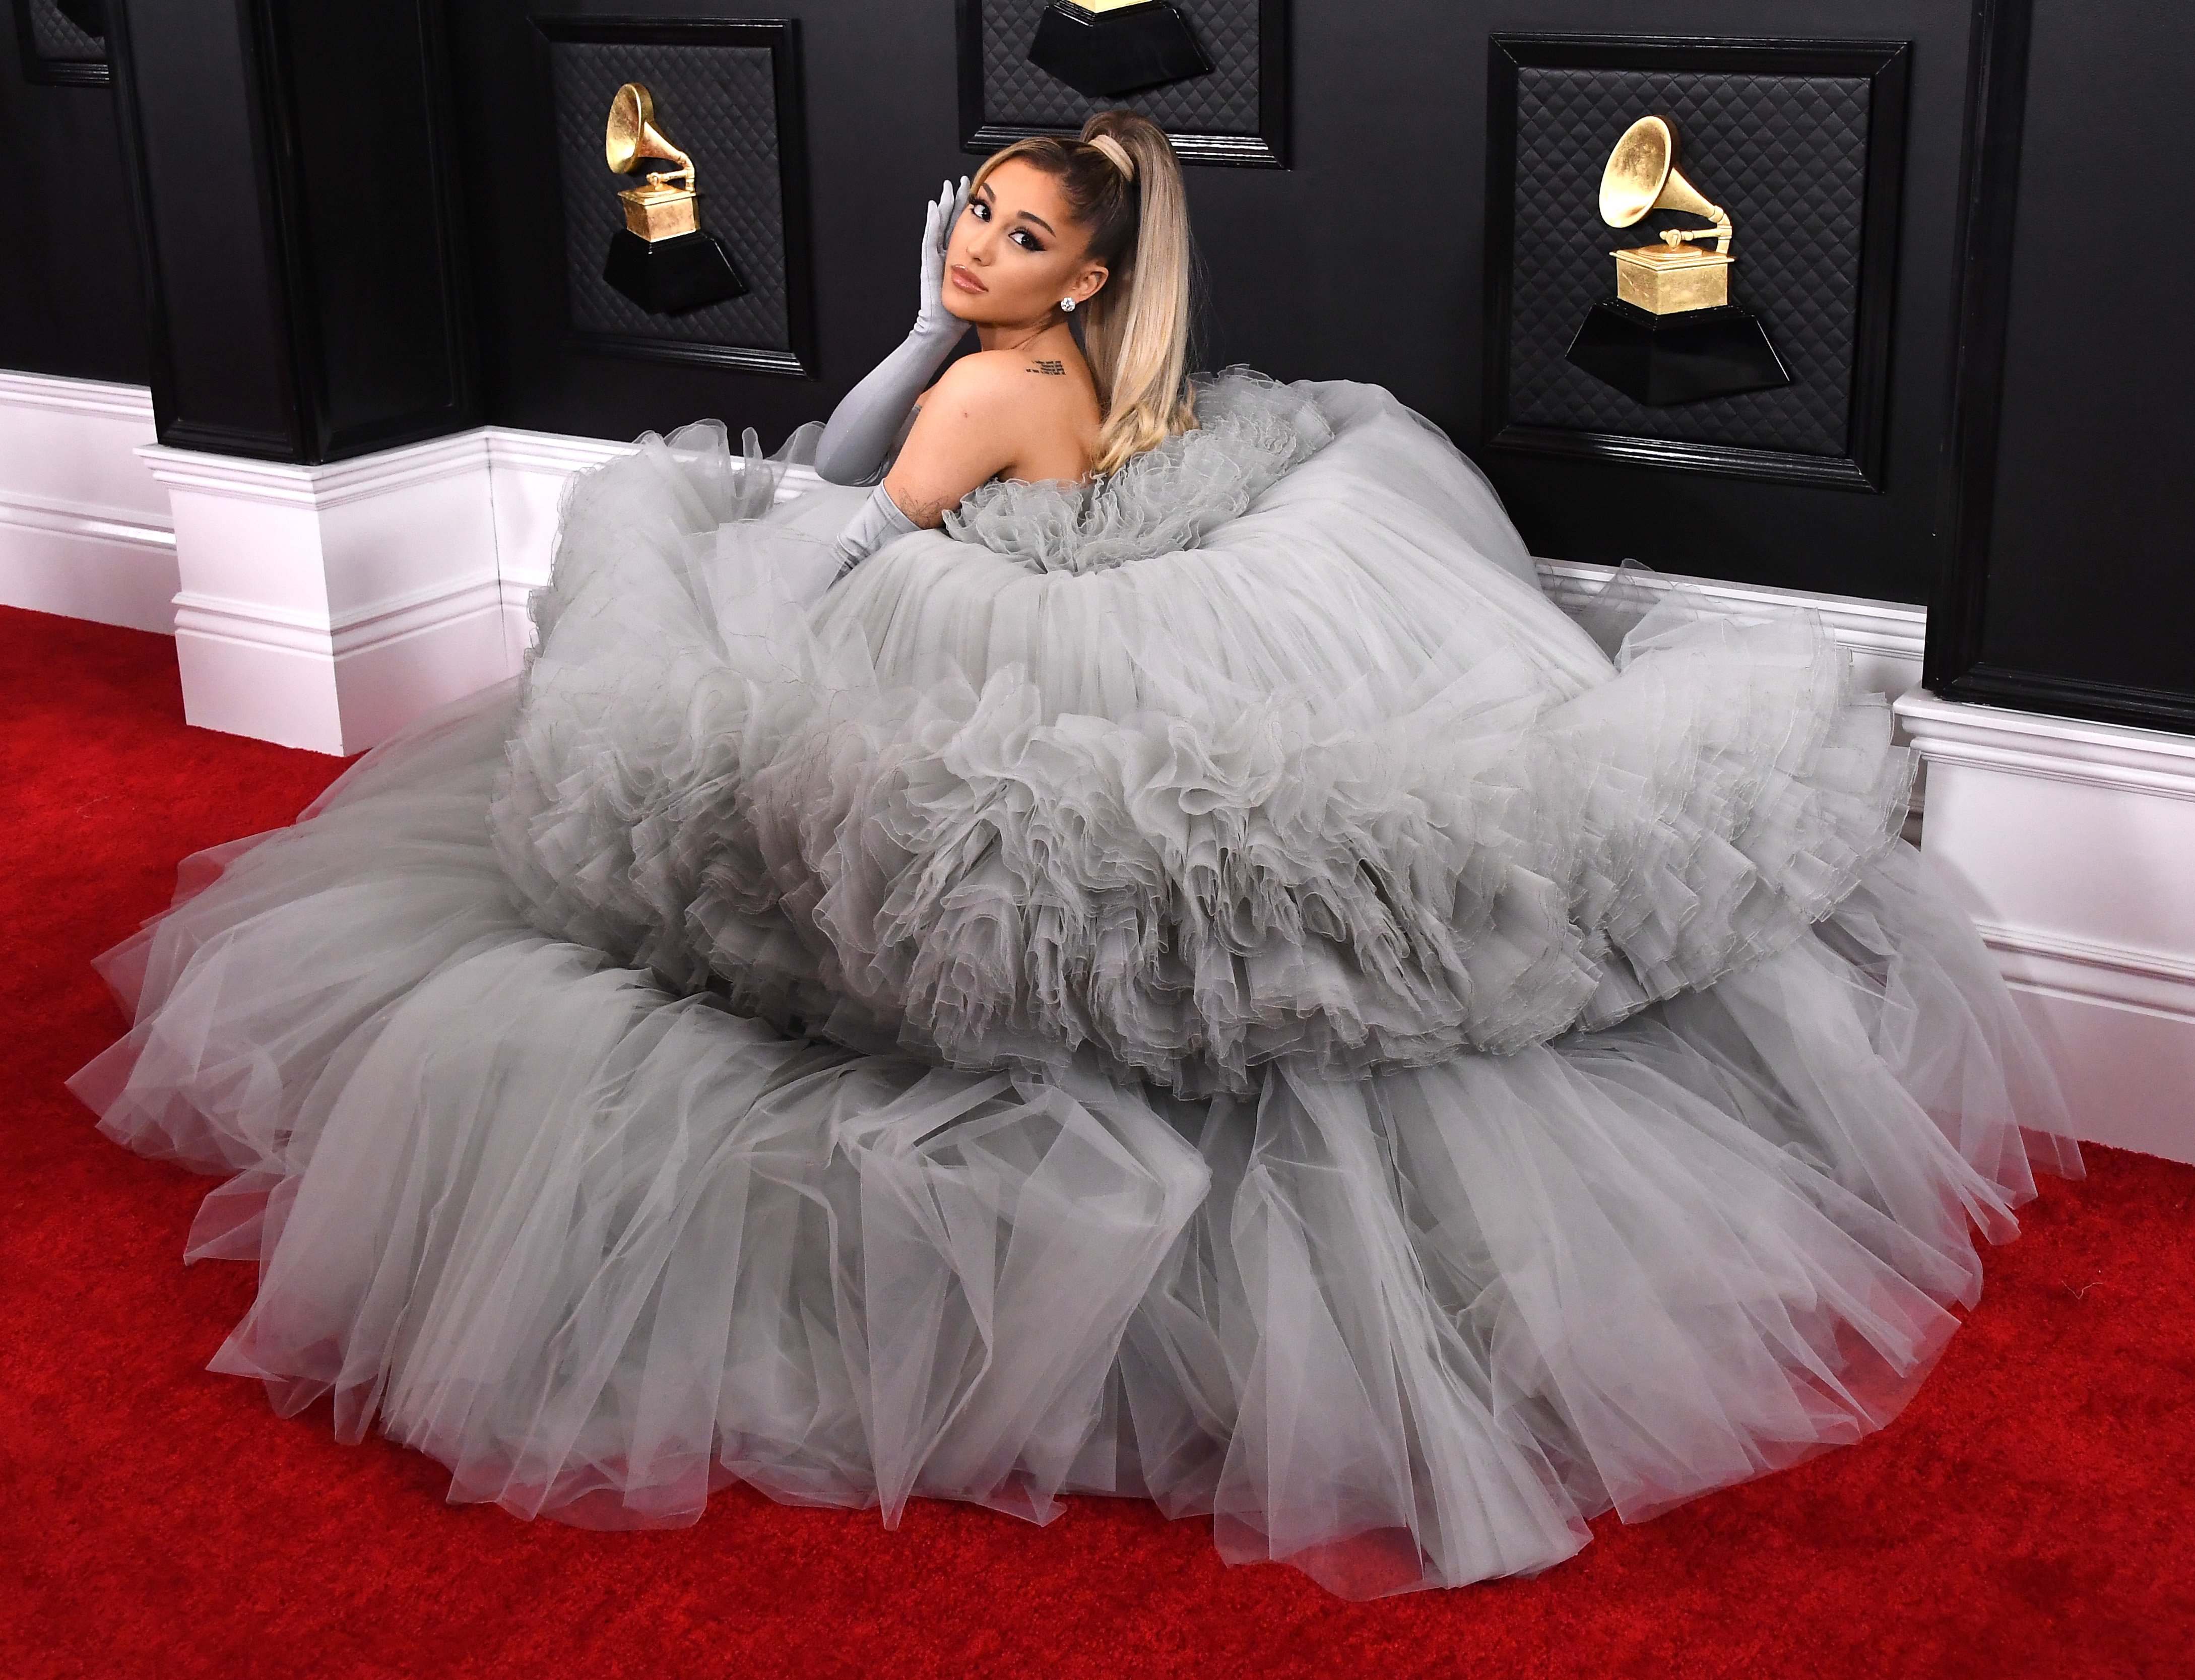 Ariana Grande arrives at the 62nd Annual GRAMMY Awards in Gray dress